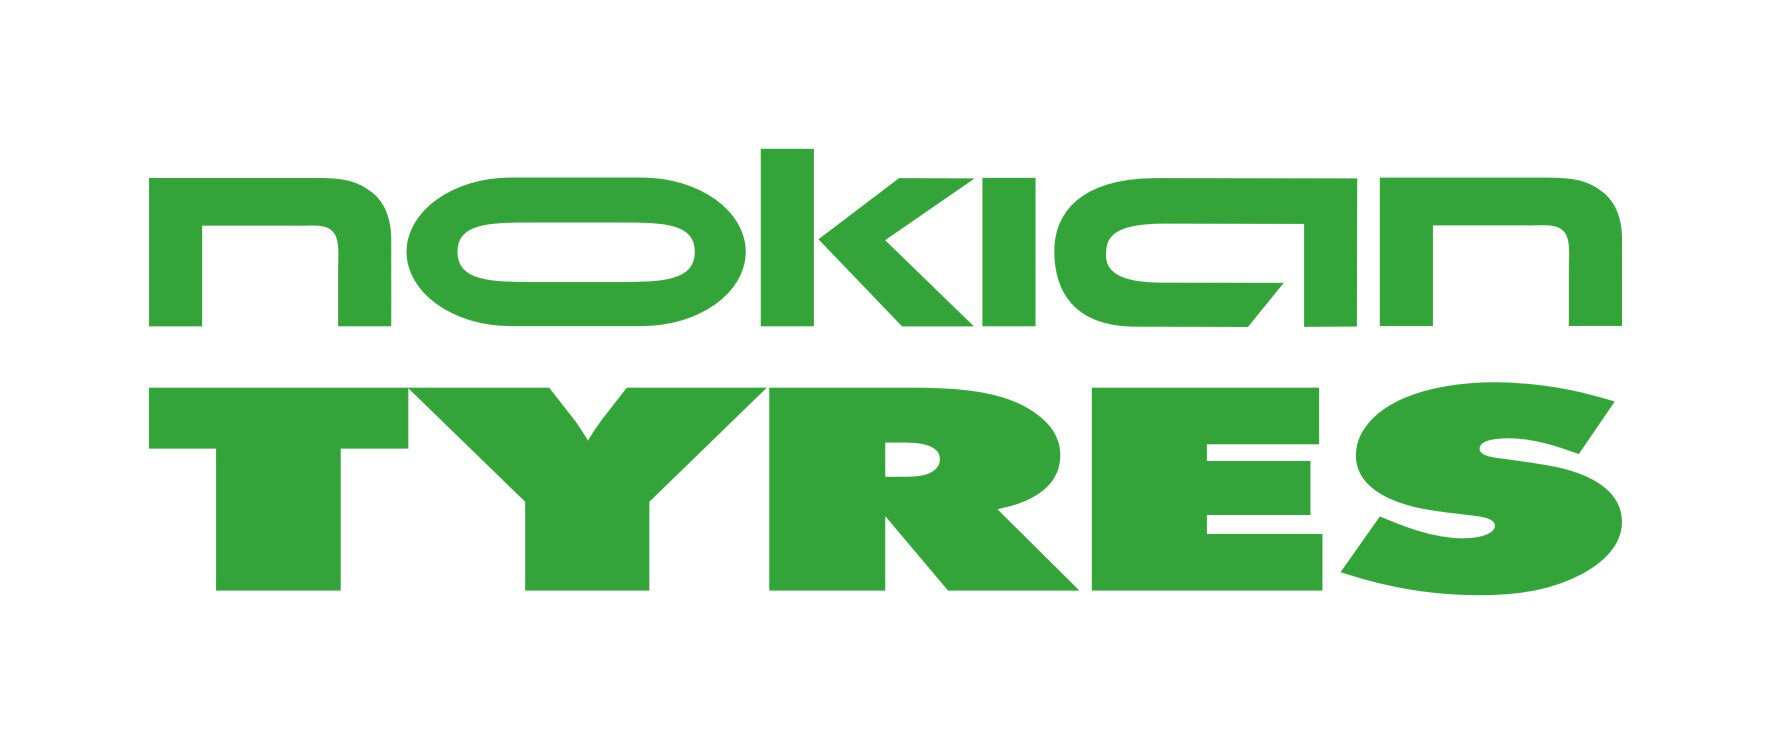 Nokian Tyres - Video Production Client.jpg